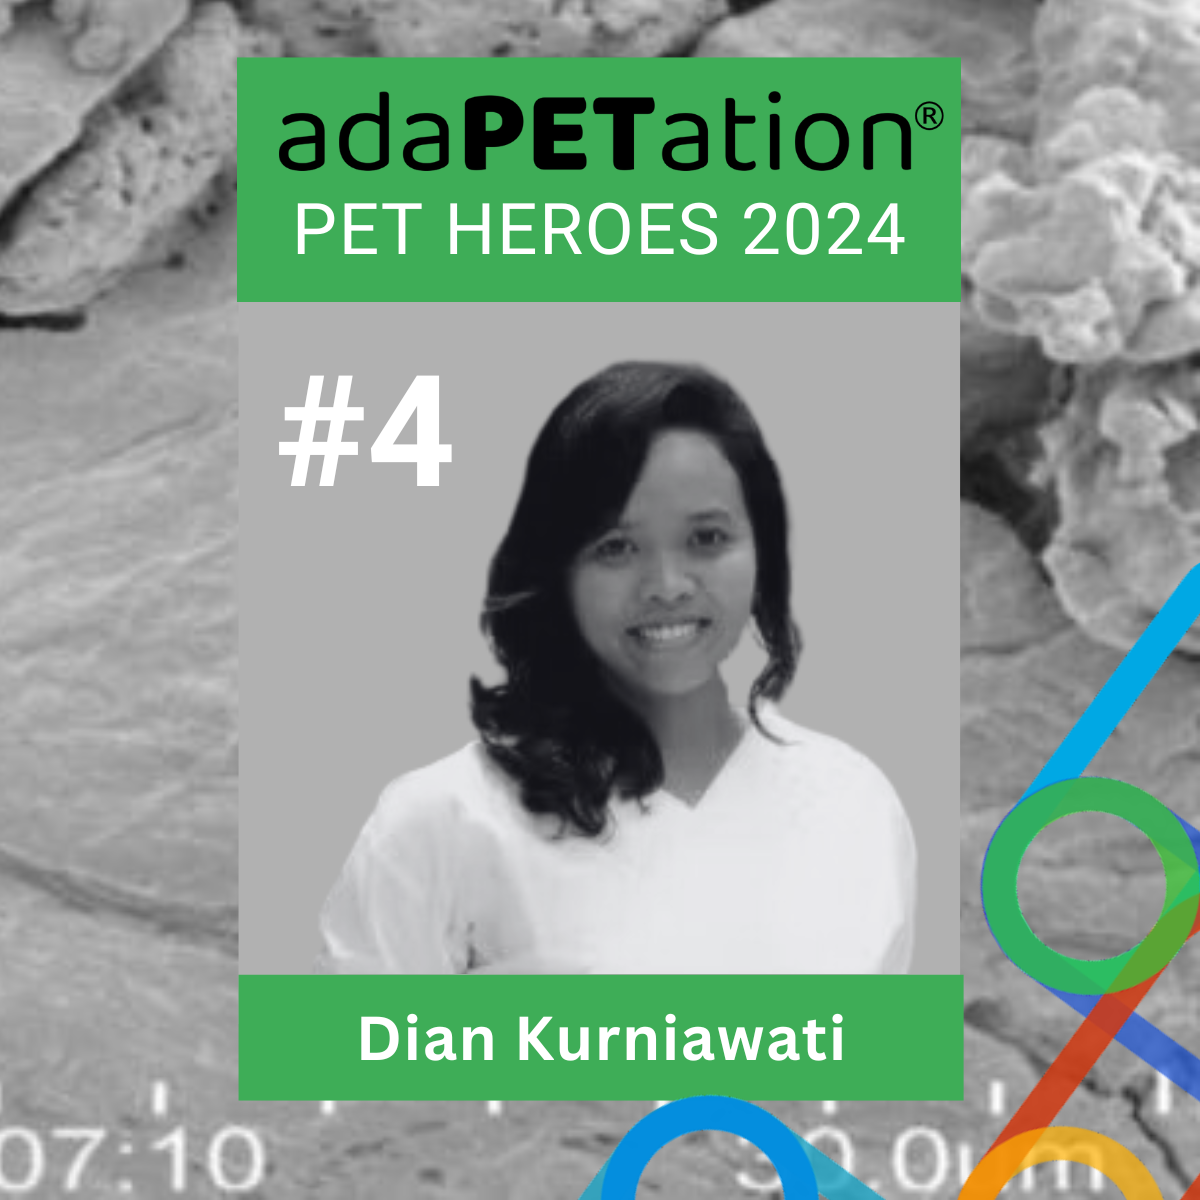 Our fourth nominee for PET Heroes 2024 is Dian Kurniawati